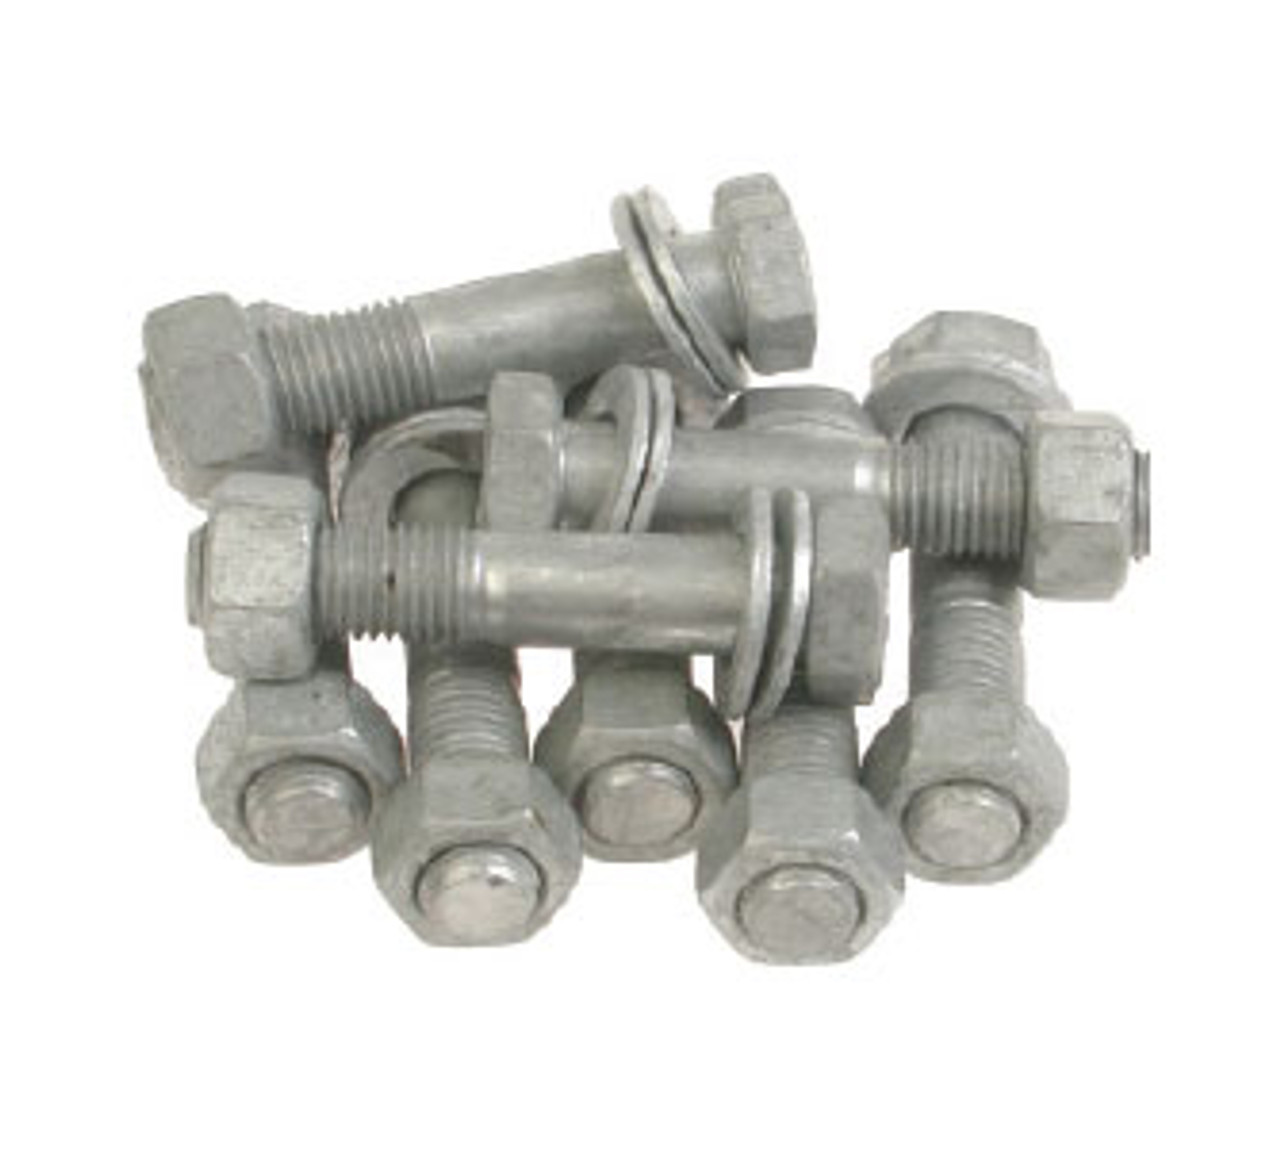 Bolt Set - PE to Steel Flange Connection (Stainless Steel) - ANSI 150 PE 140 - ANSI 150 - 22 x 8